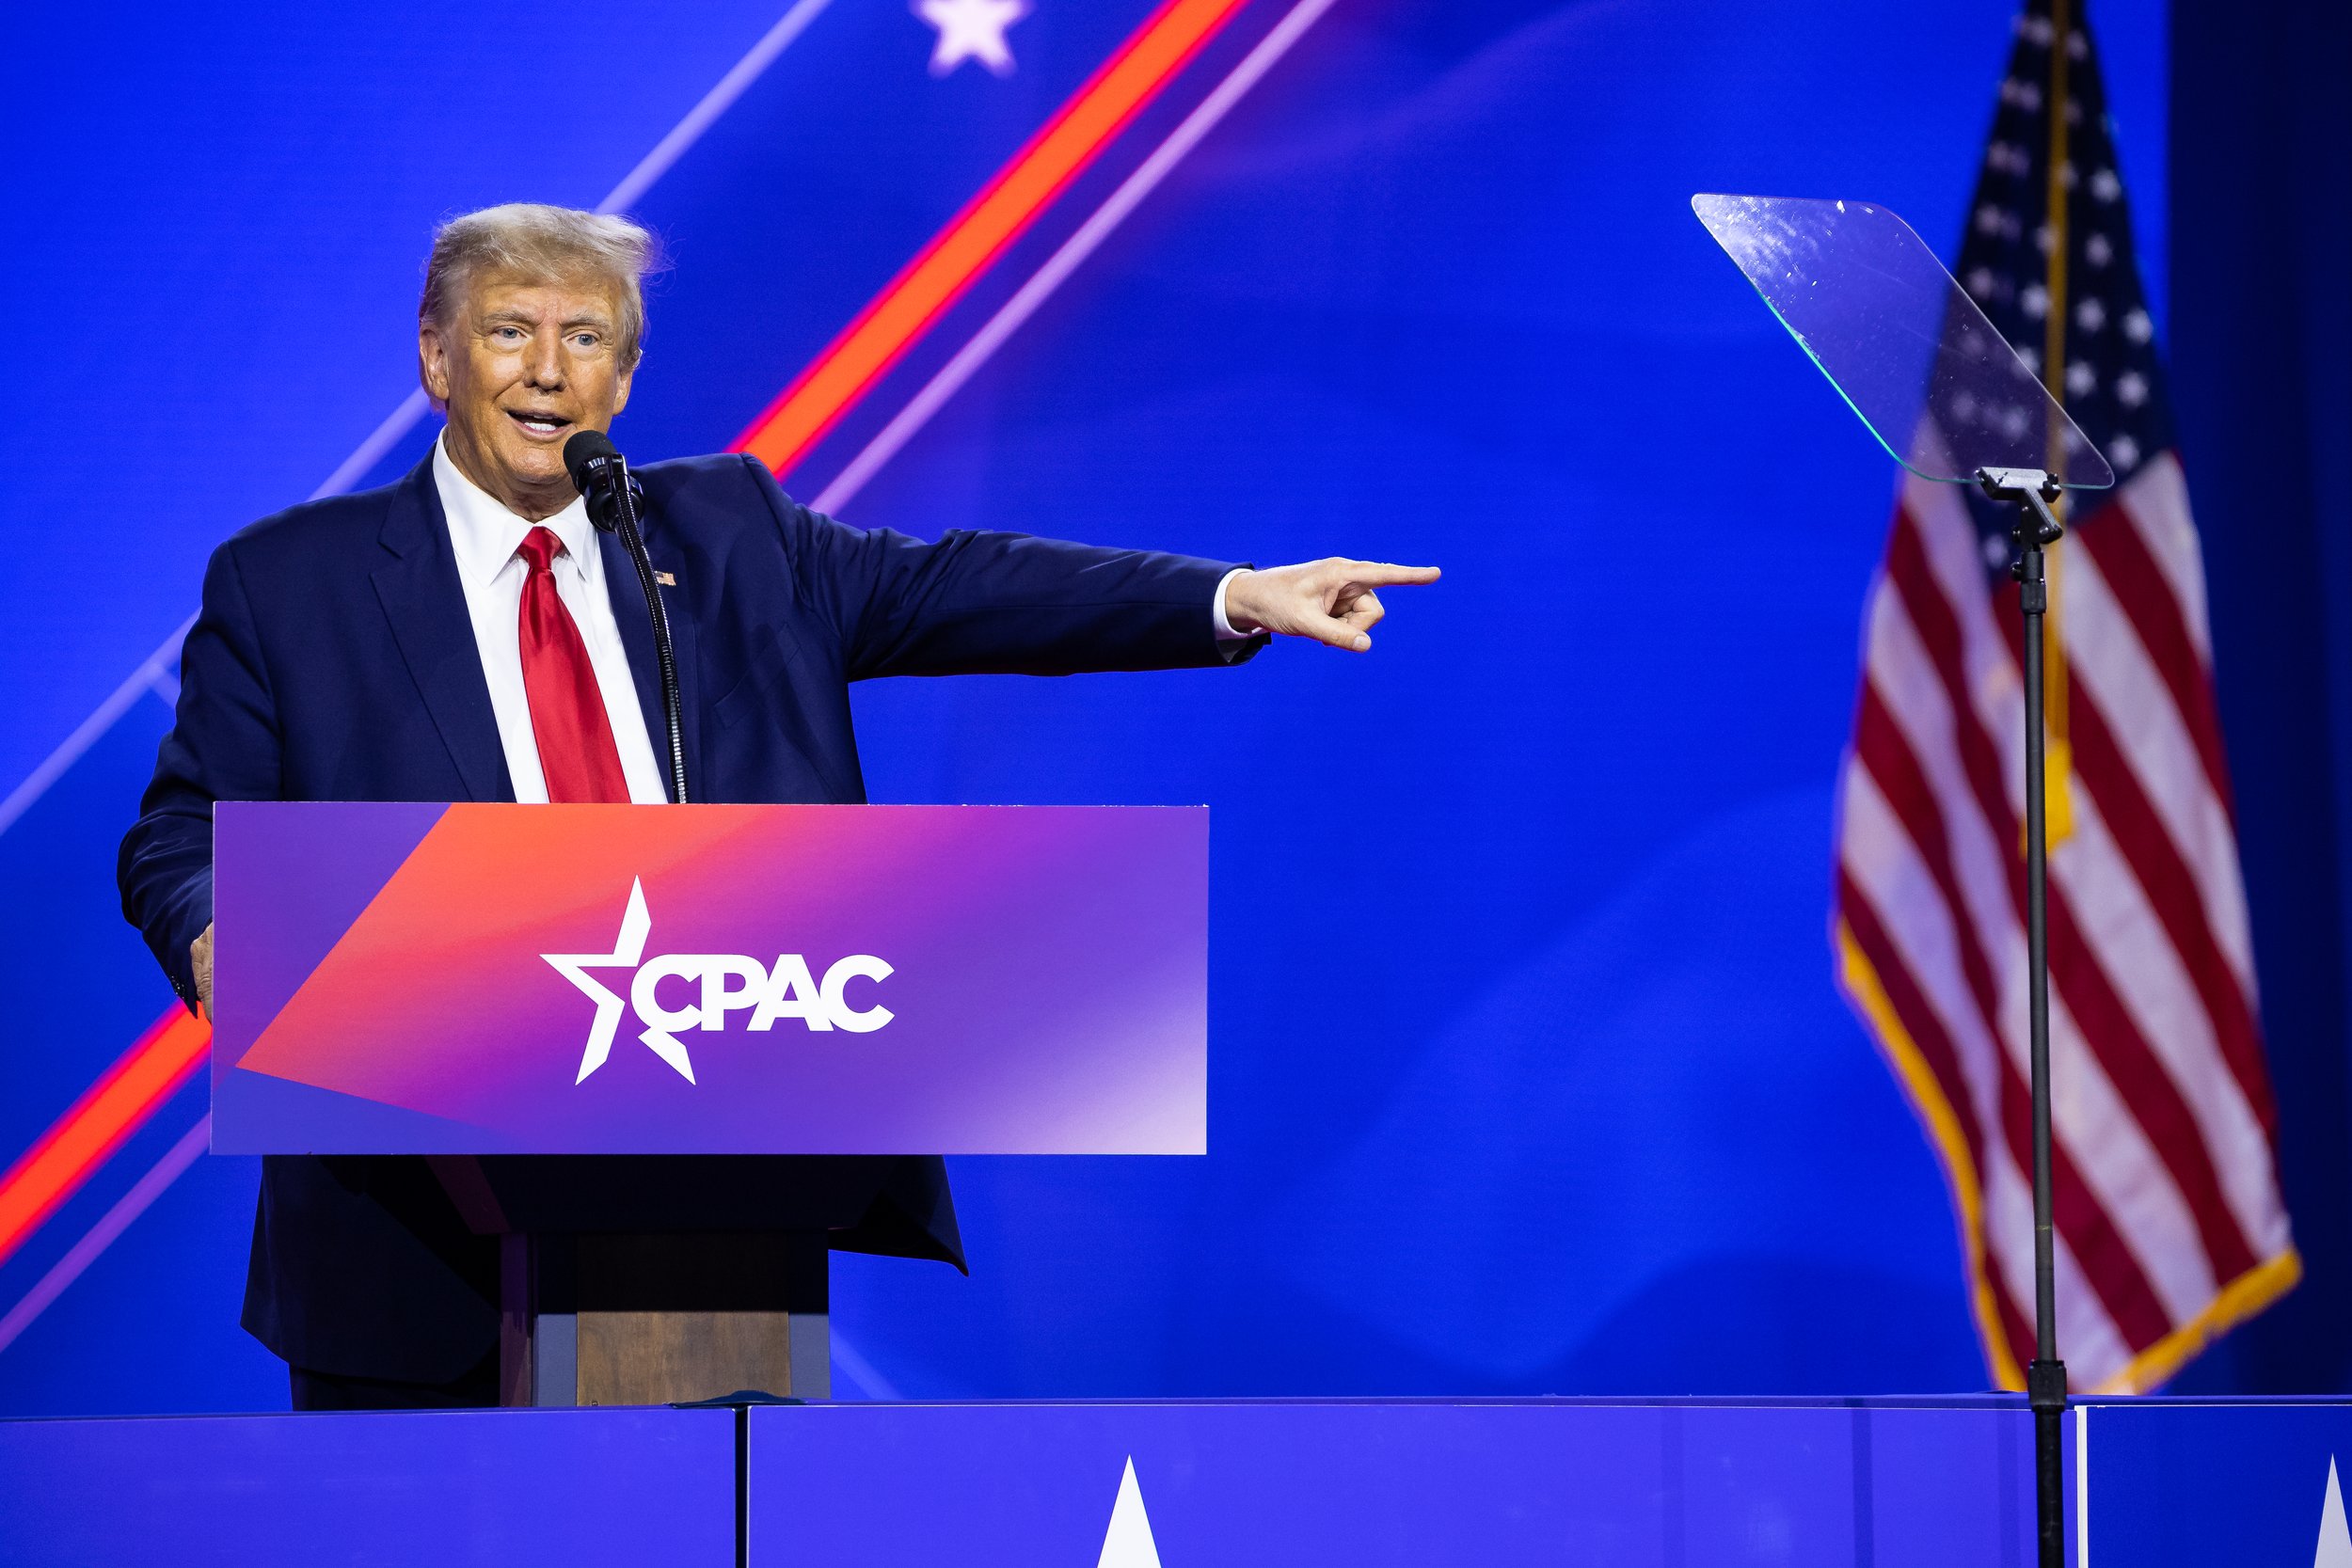  Former President Donald Trump speaks during the Conservative Political Action Conference (CPAC) at the Gaylord National Hotel and Convention Center in National Harbor, Md., March 4, 2023. 